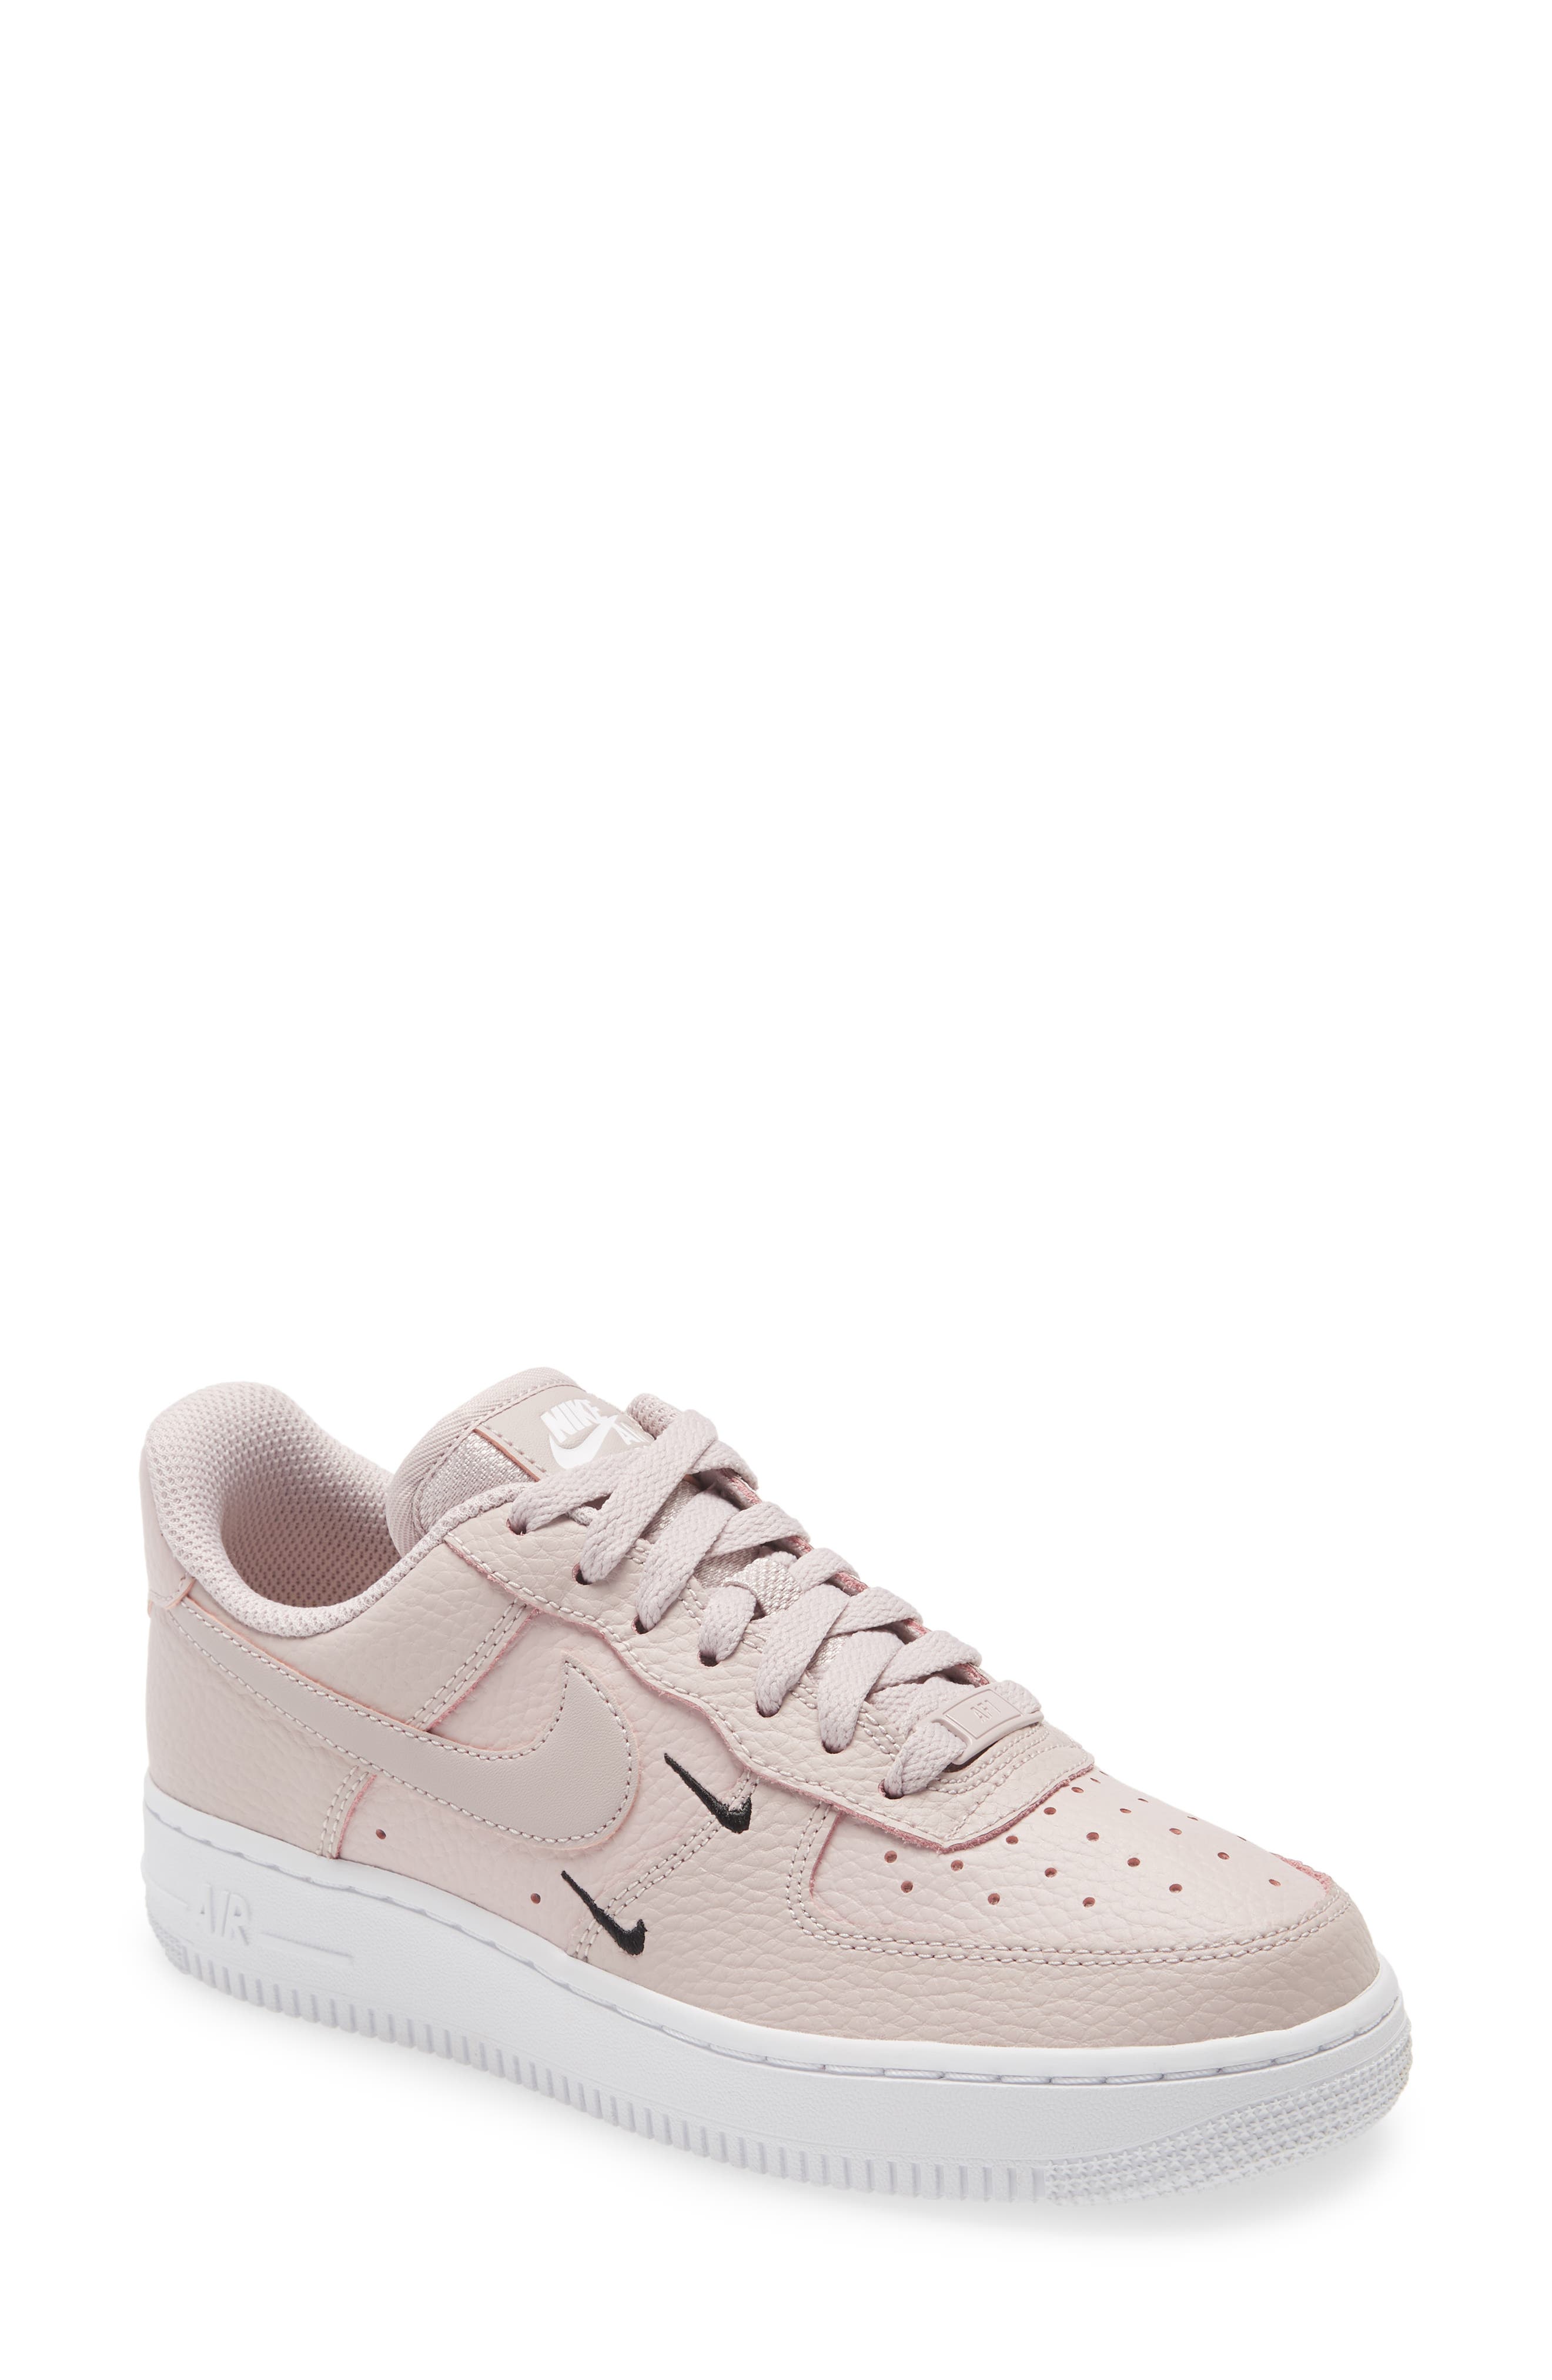 air force ones womens nordstrom